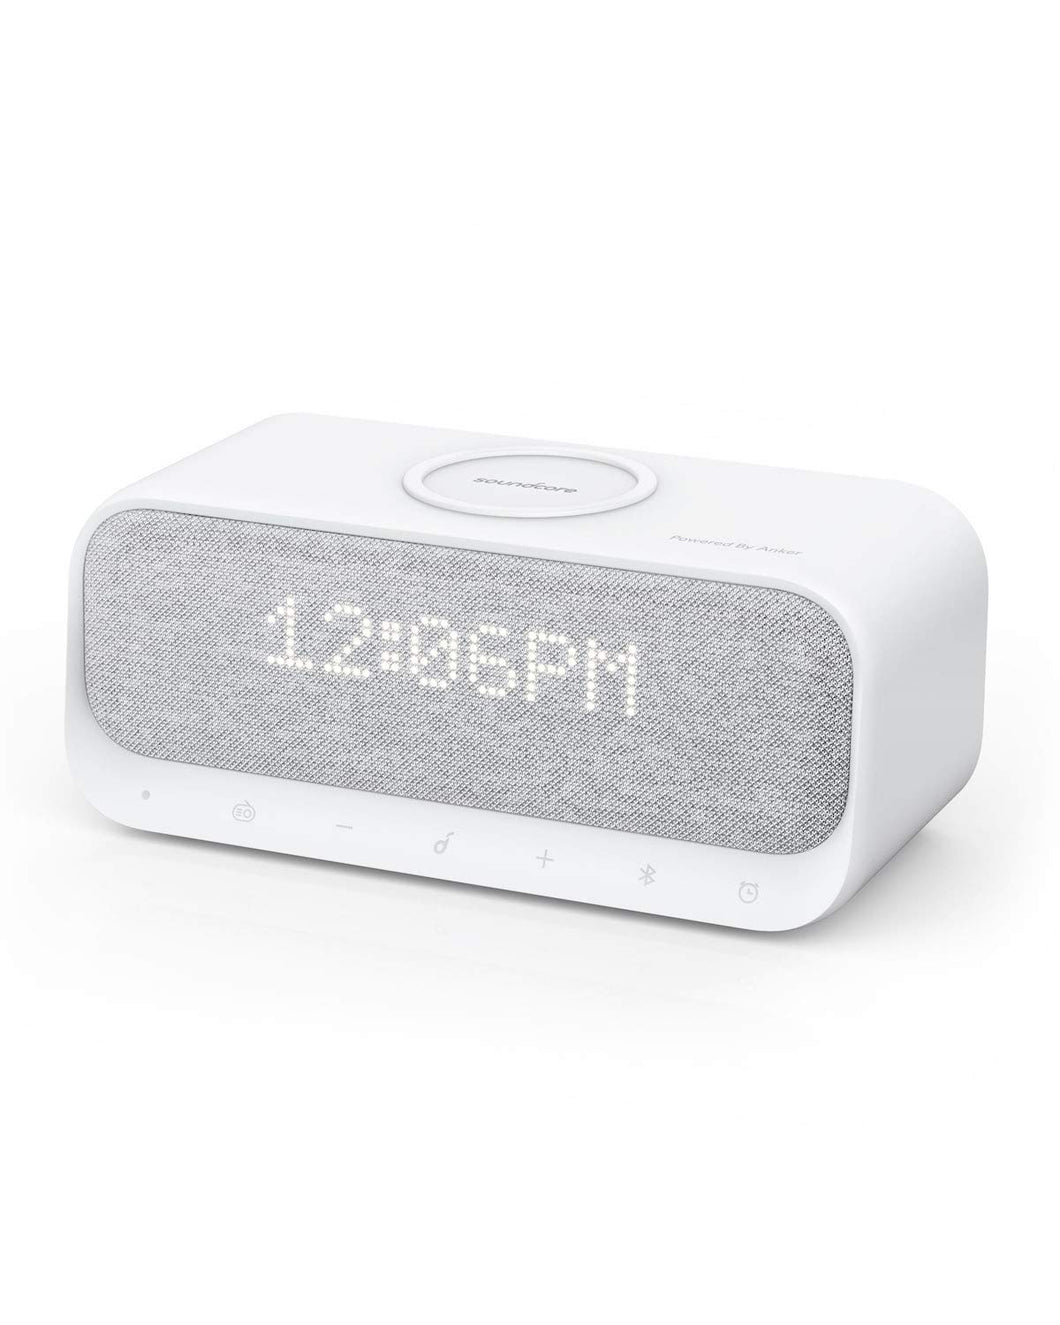 Bluetooth Speaker, Soundcore Wakey Bluetooth Speaker Powered by Anker with FM Radio, Alarm Clock, White Noise, Stereo Sound, Qi Wireless Charger with 7.5W/10W Fast Wireless Charging for iPhone/Samsung